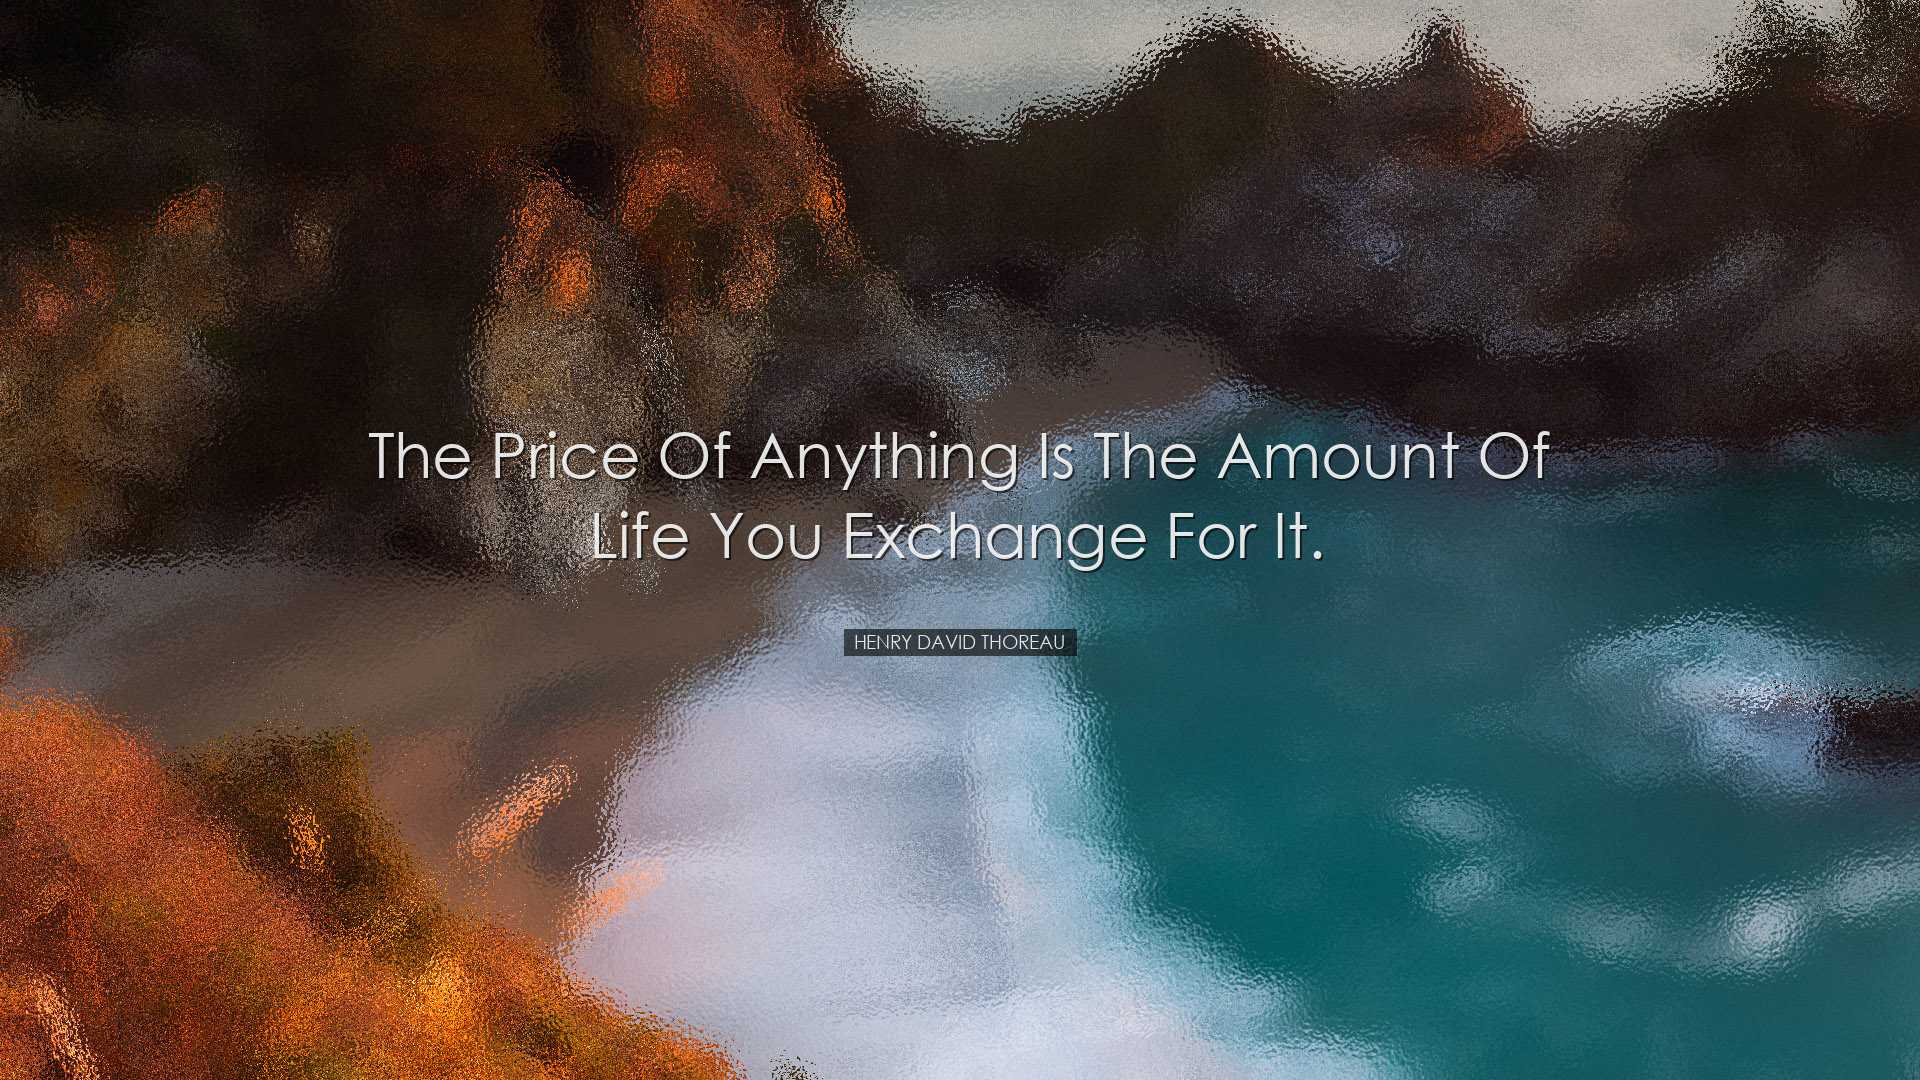 The price of anything is the amount of life you exchange for it. -